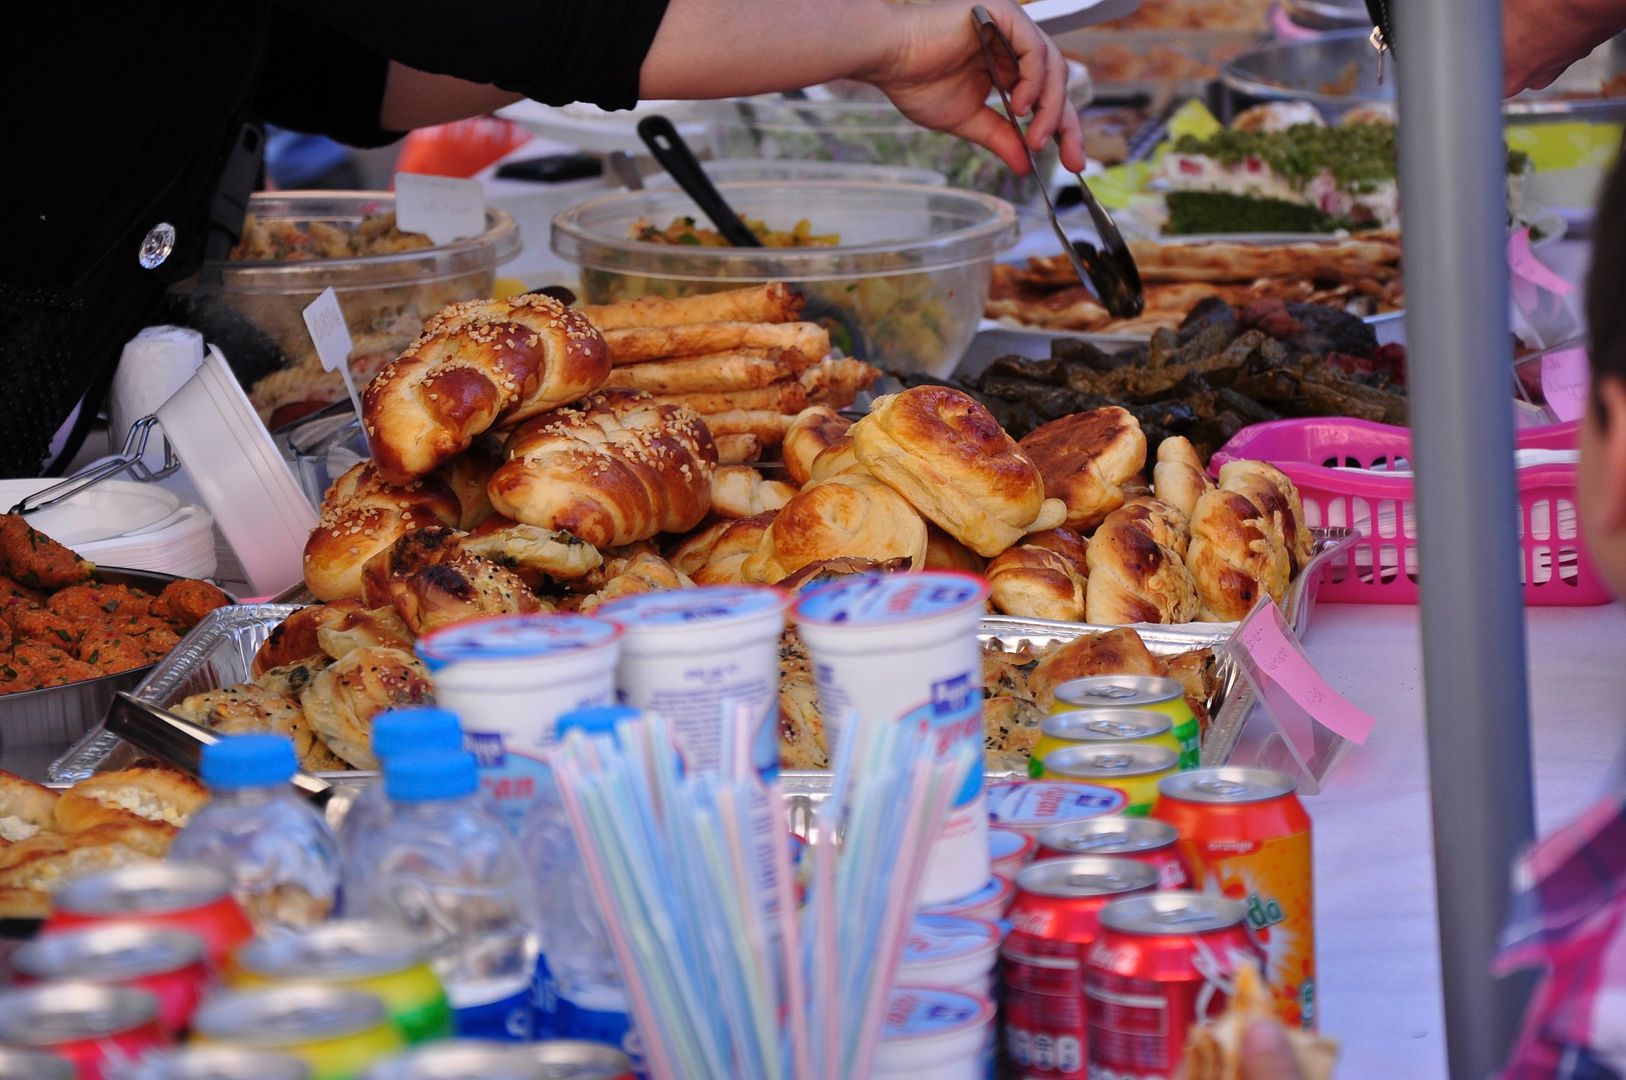 29.03.12, Yummy food from Turkey at the Spring festival.